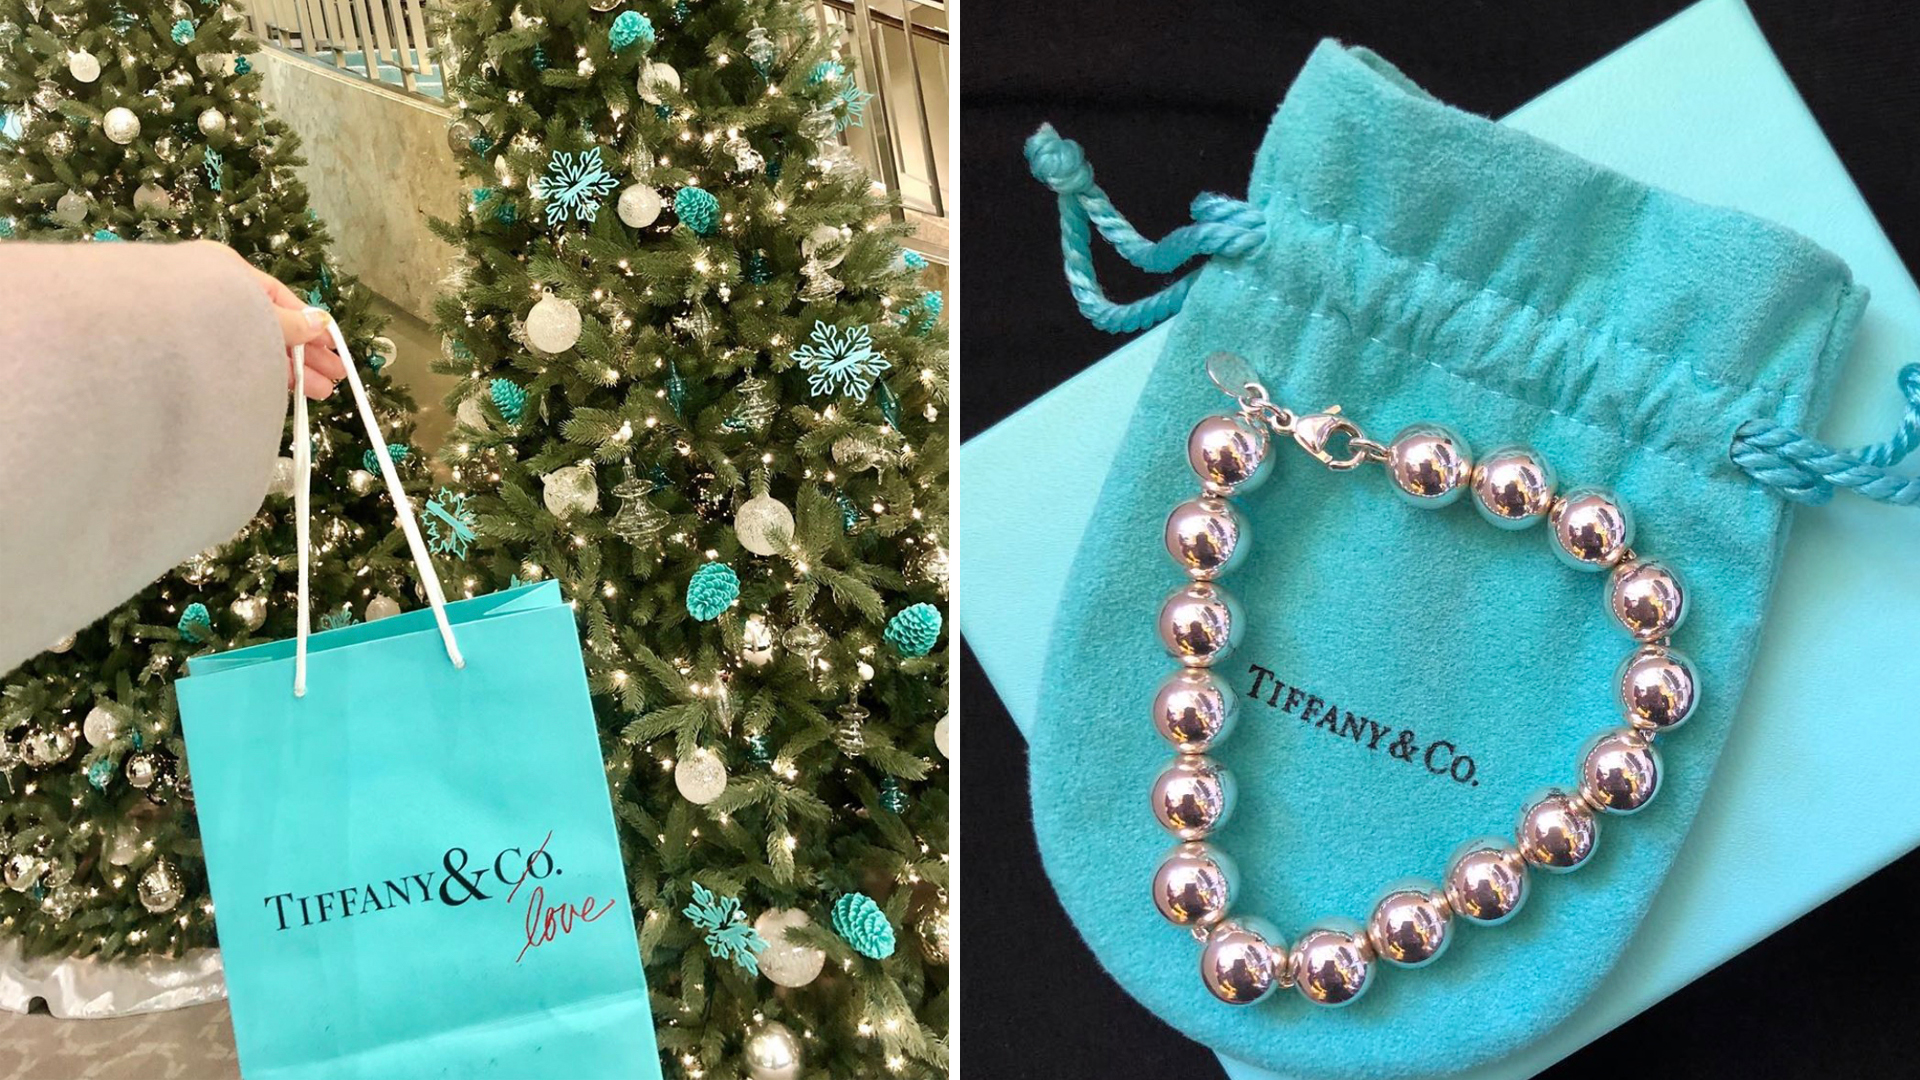 10 Items You Can Get At Tiffany & Co. For Under $250